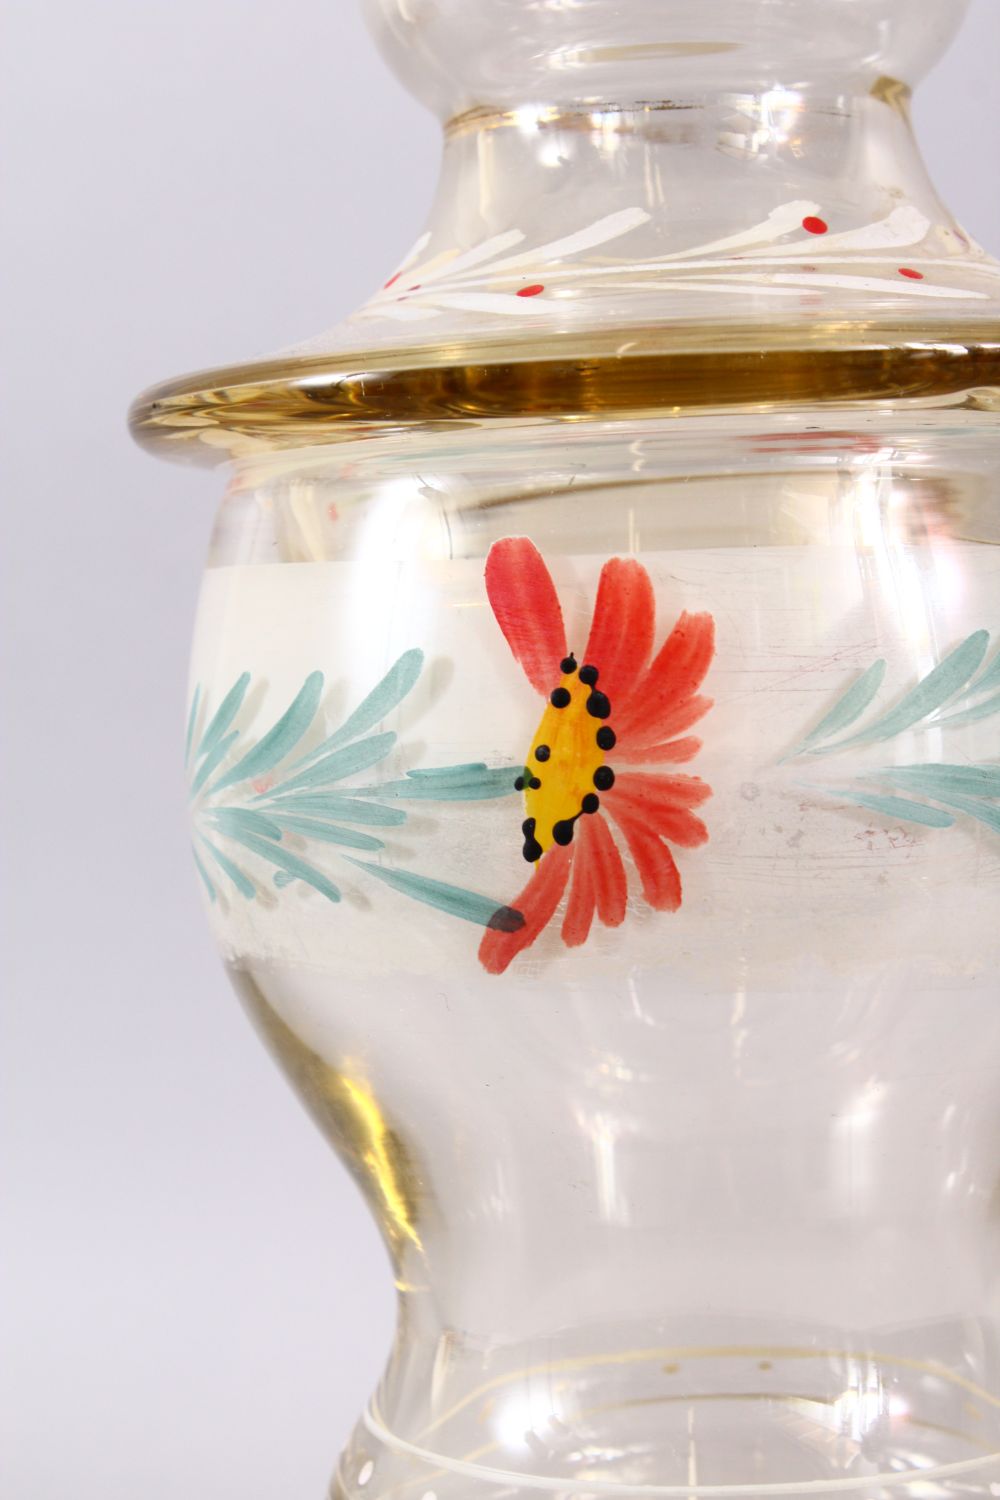 A 19TH CENTURY ENAMELED POSS MOSER GLASS VASE & COVER, with enameled floral decoration and gilt - Image 2 of 3